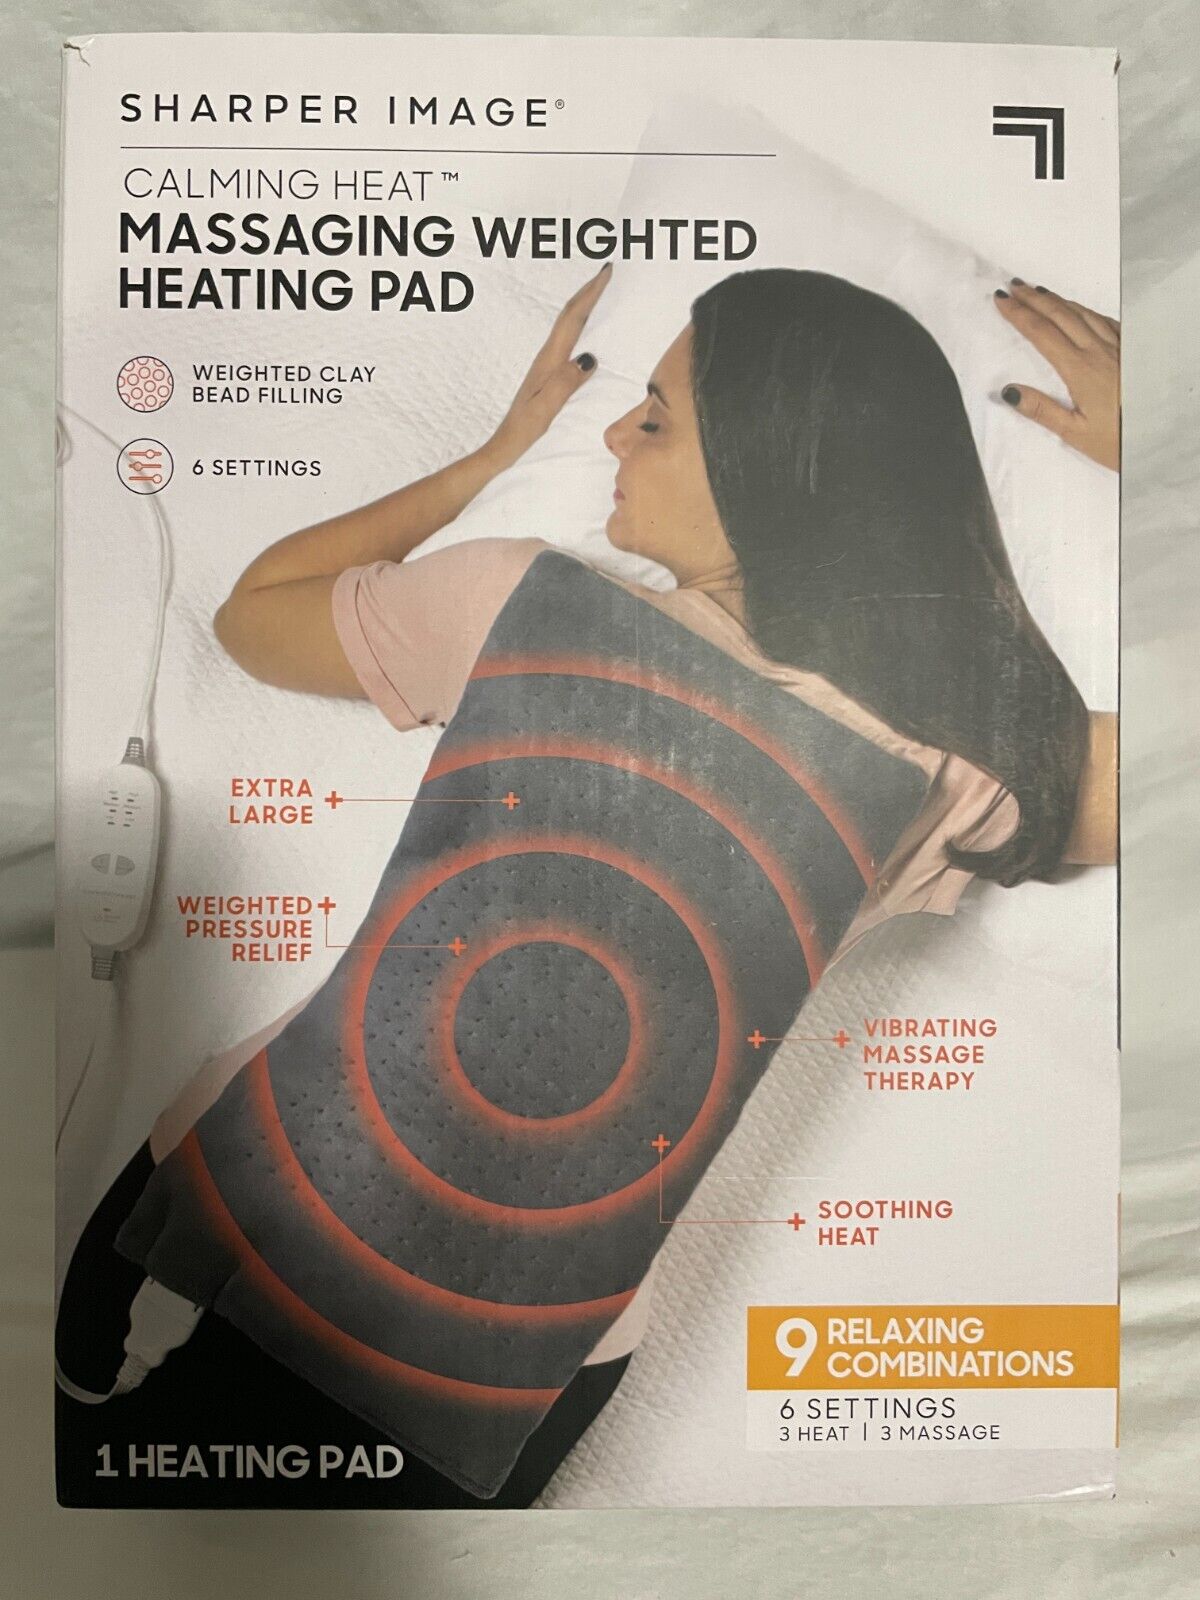 SHARPER IMAGE Massaging Weighted Heating Pad, 4 lb,  - NEW IN BOX